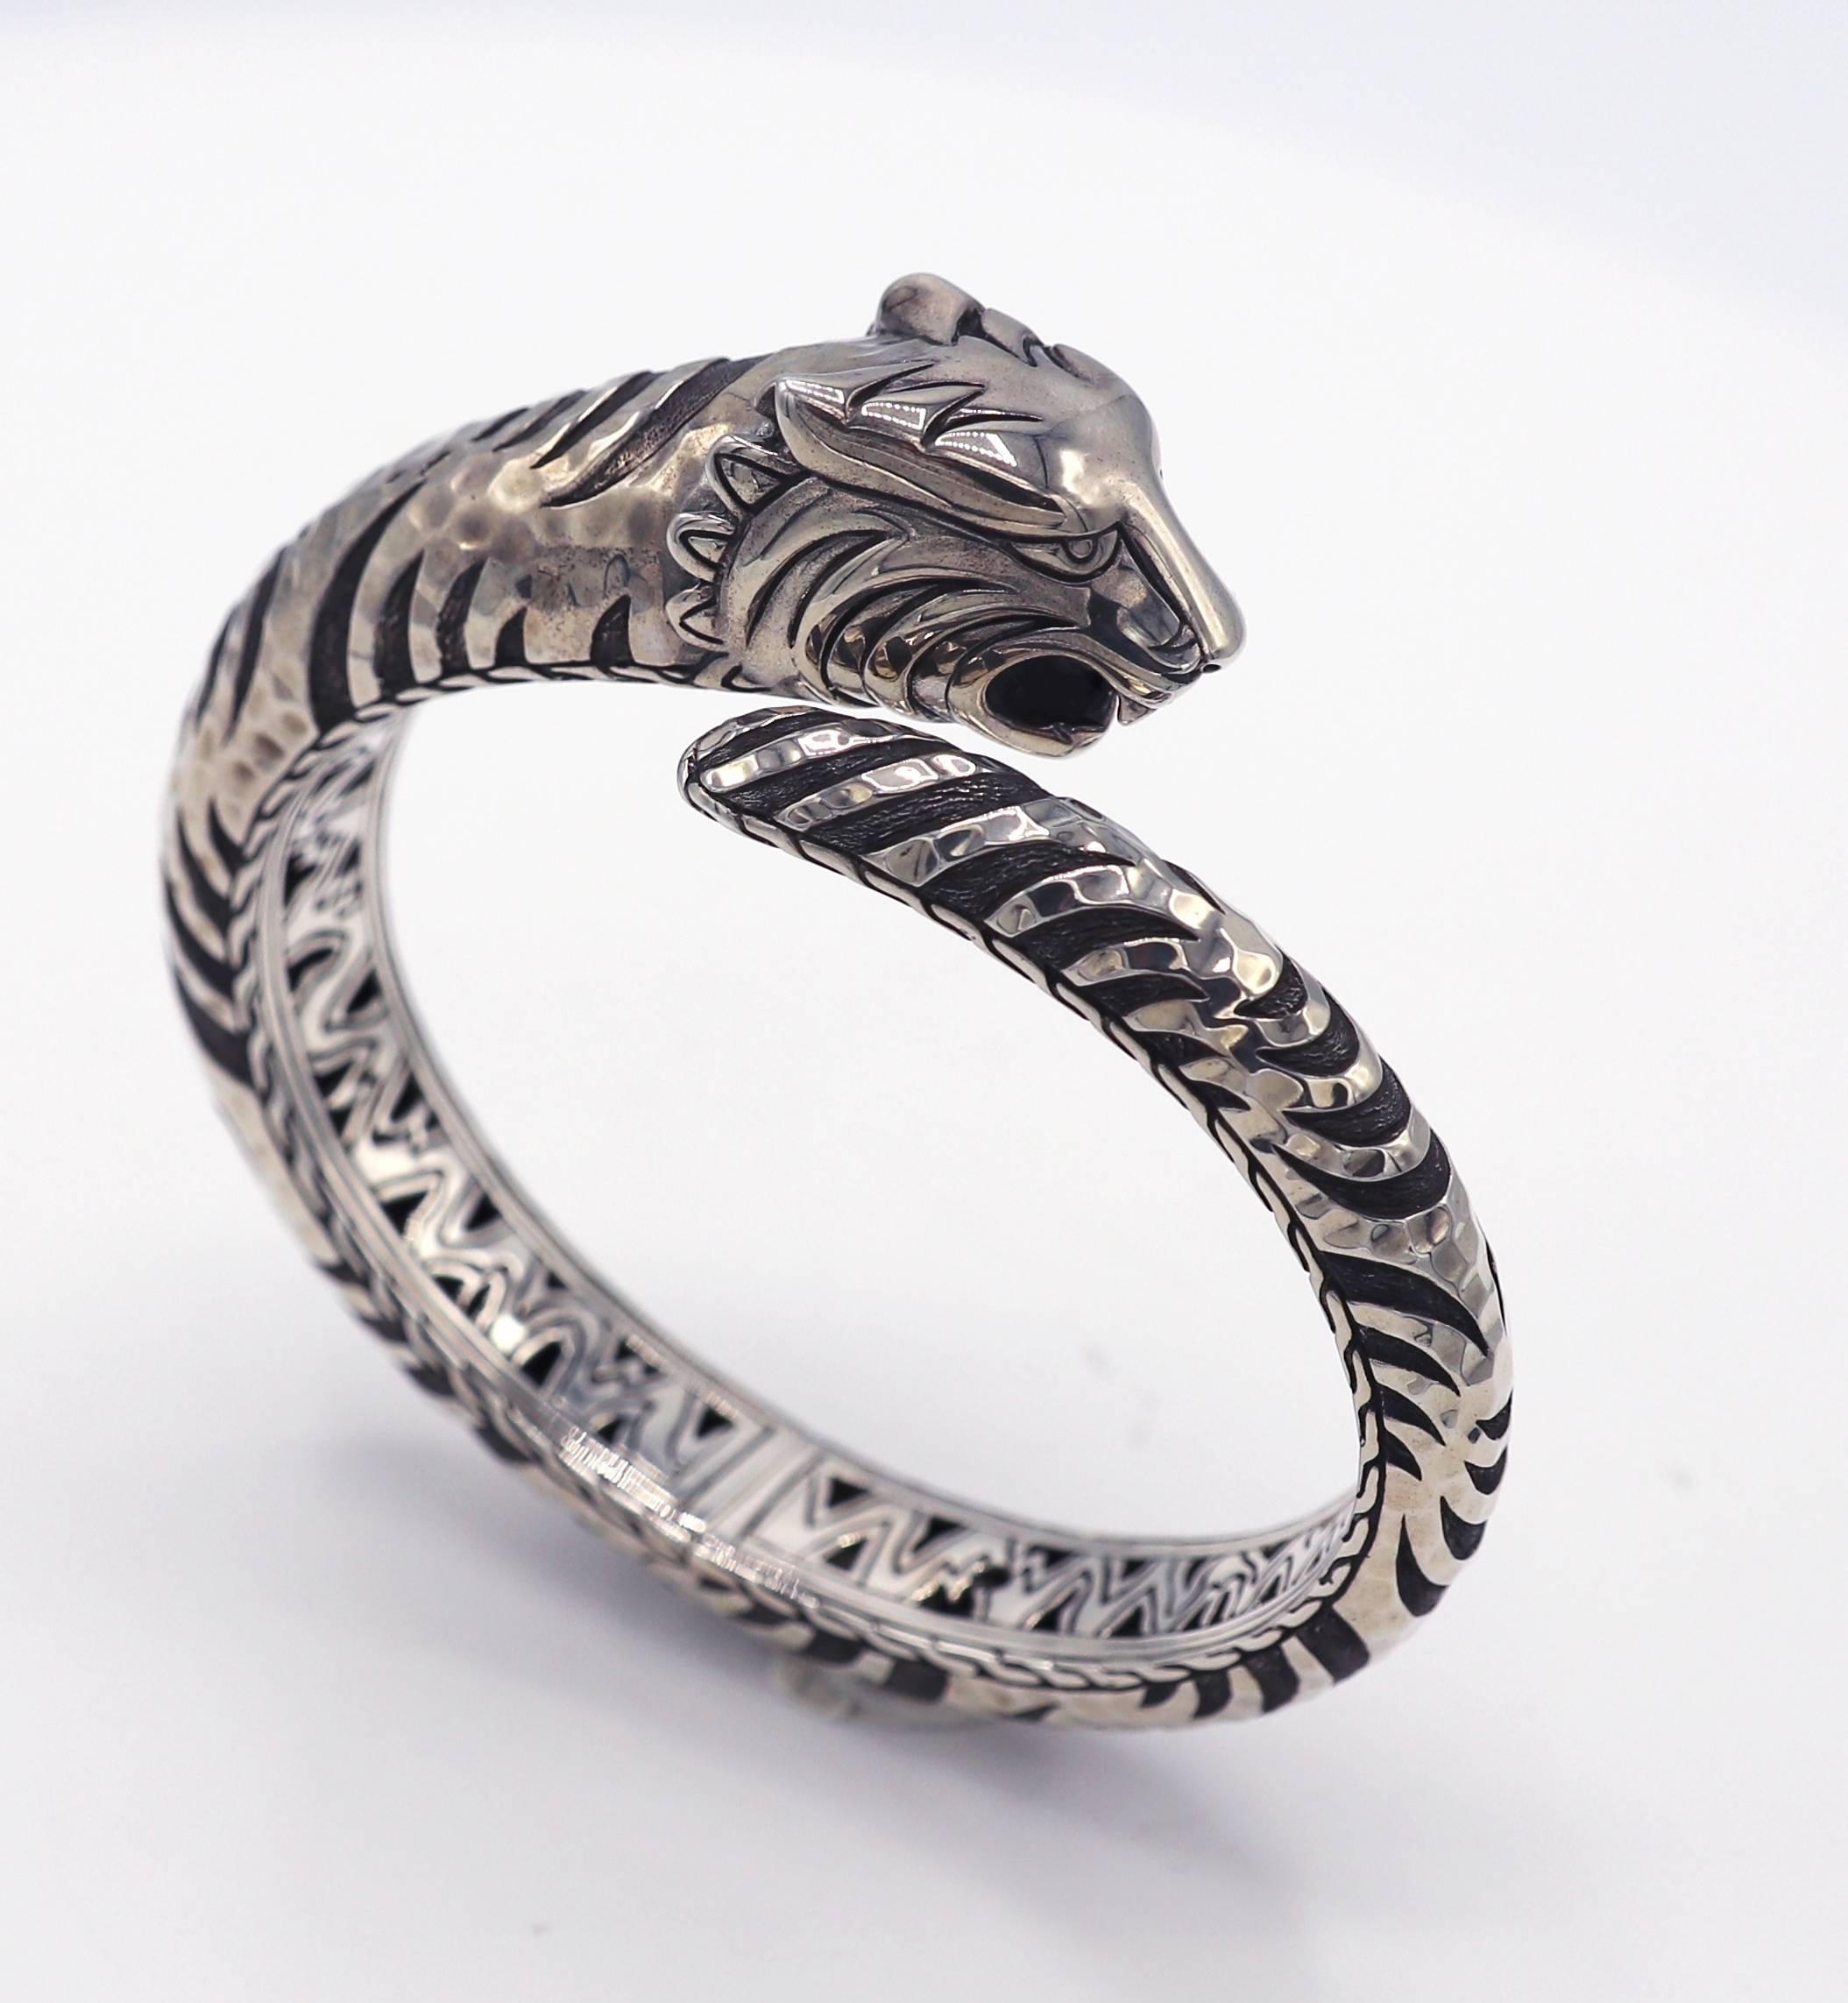 John Hardy Sterling Silver Legends Tiger Head Hinged Bangle Bracelet 
Metal: Sterling silver
Weight: 71 grams
Outer diameter: 75mm
Inner diameter: 62mm
Width: 8 - 16.5mm
Length: Fits approx. 7